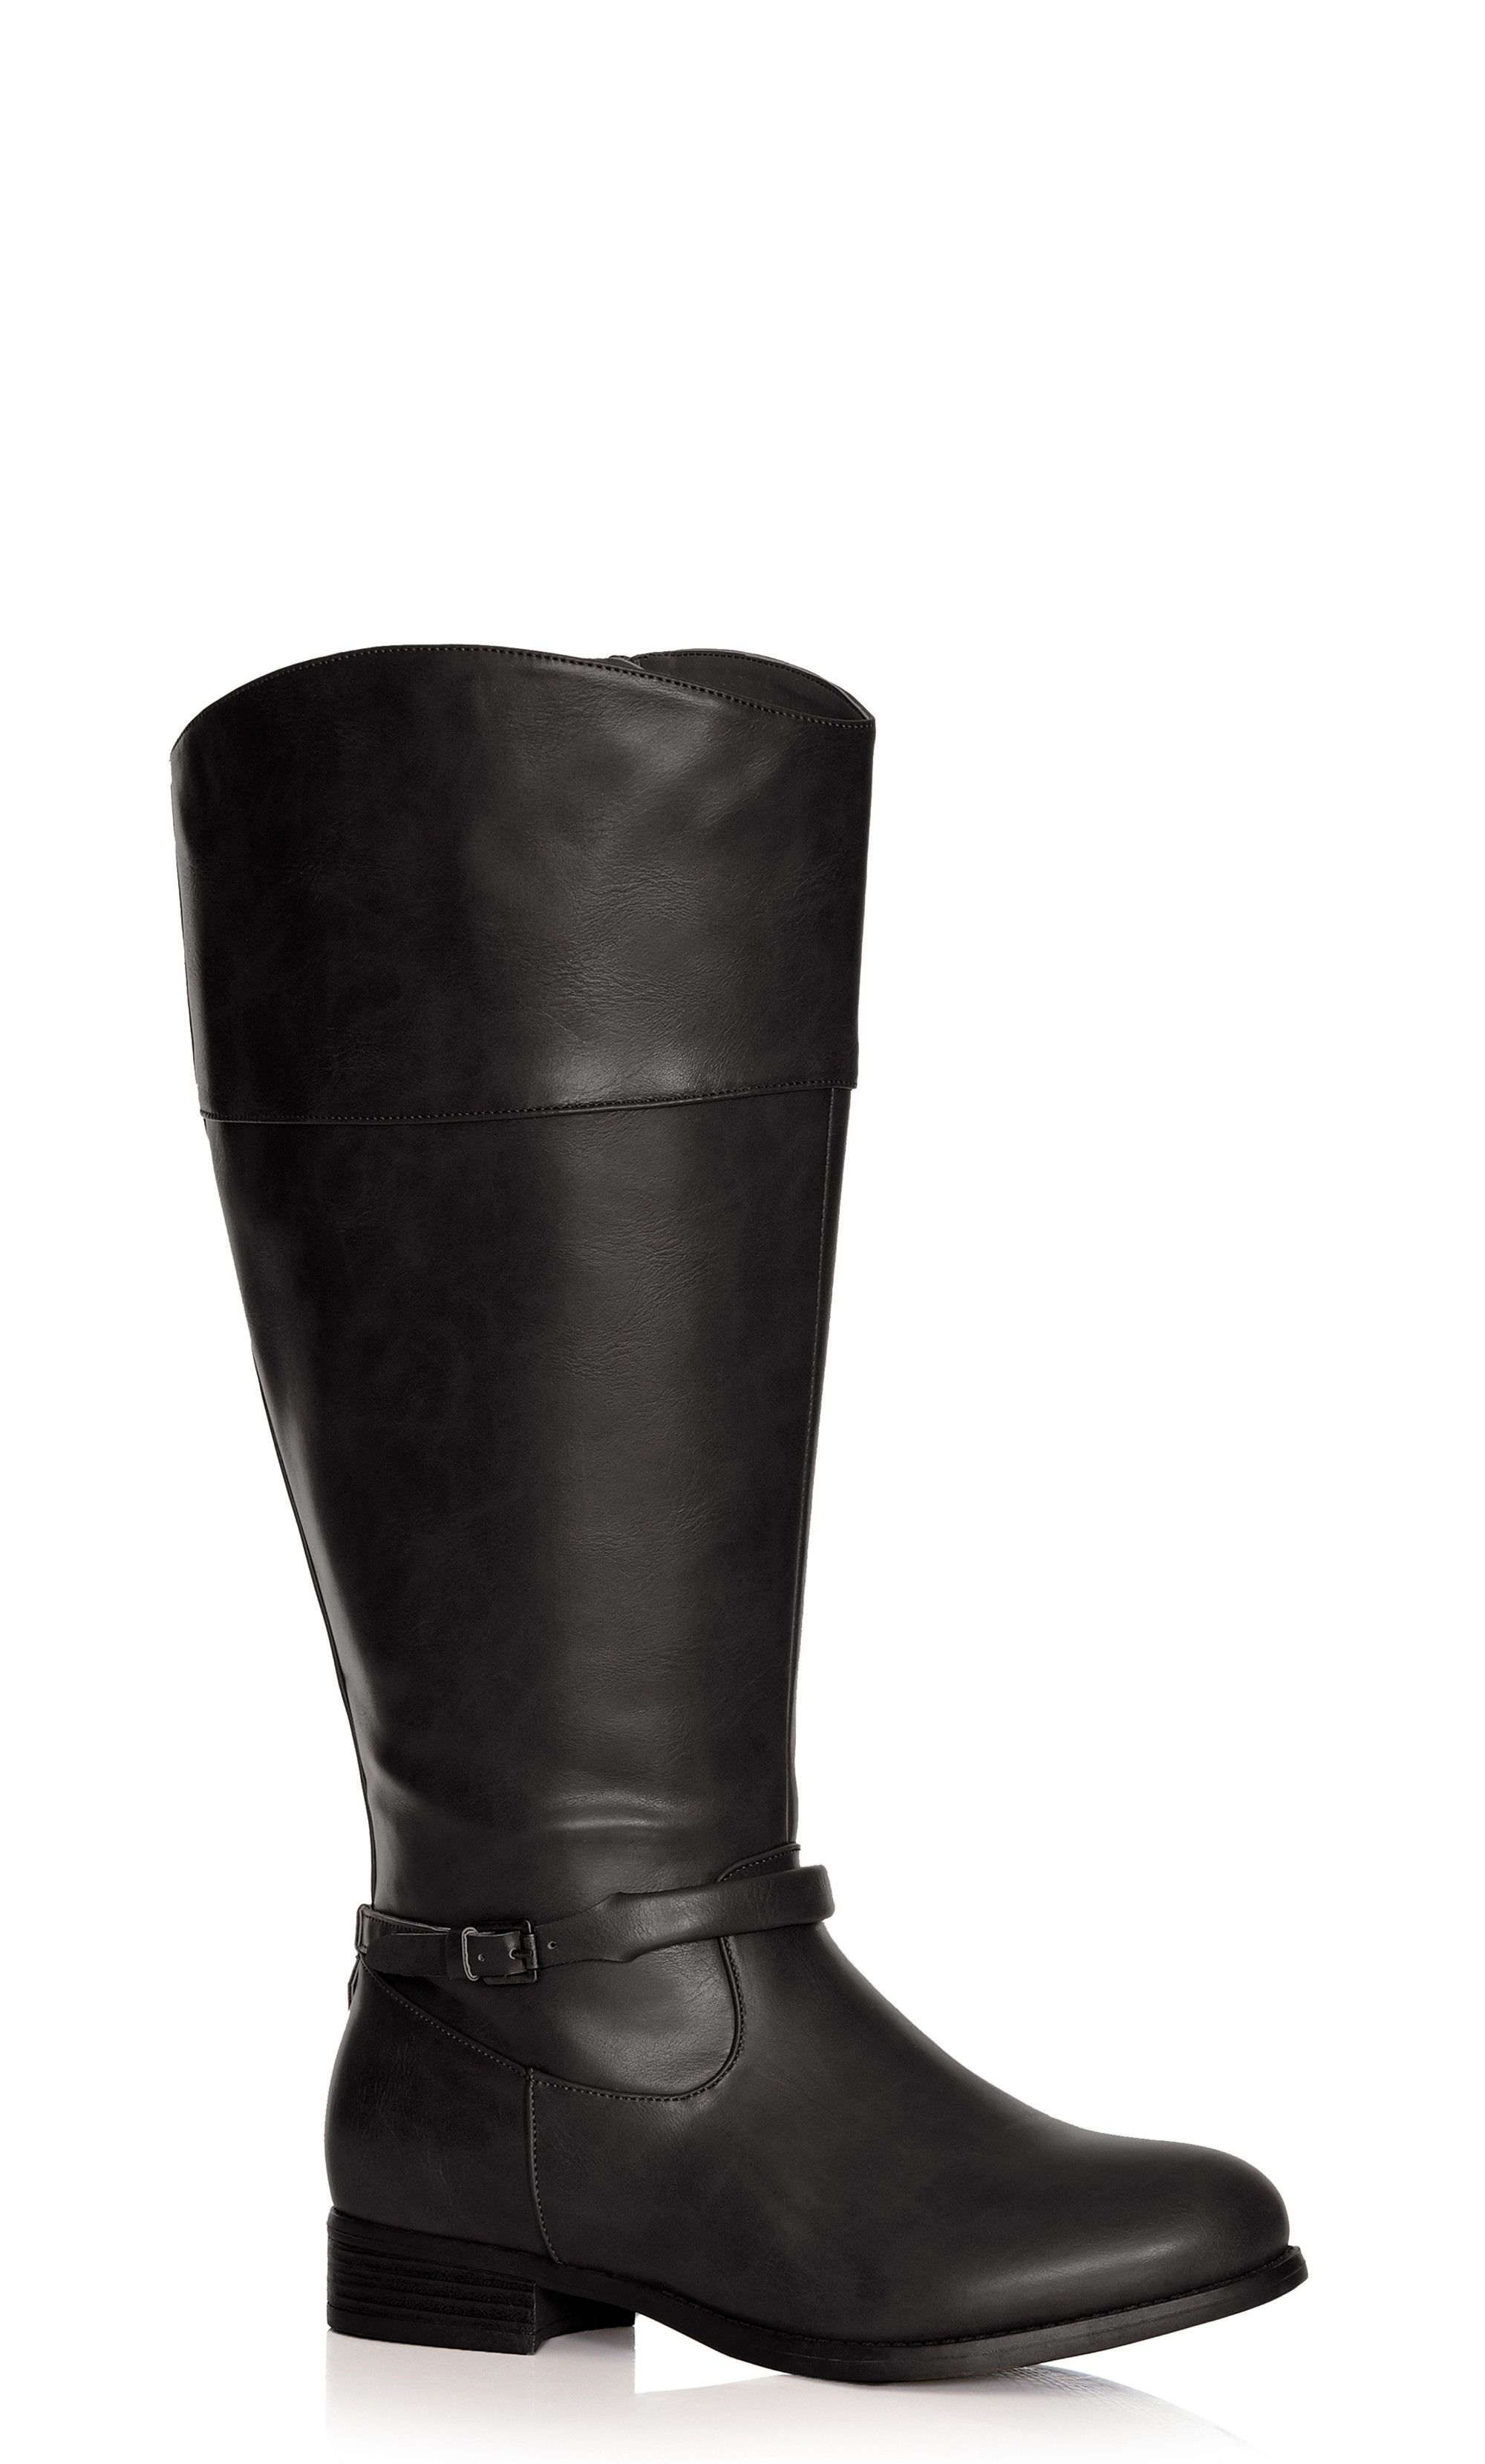 zip up riding boots